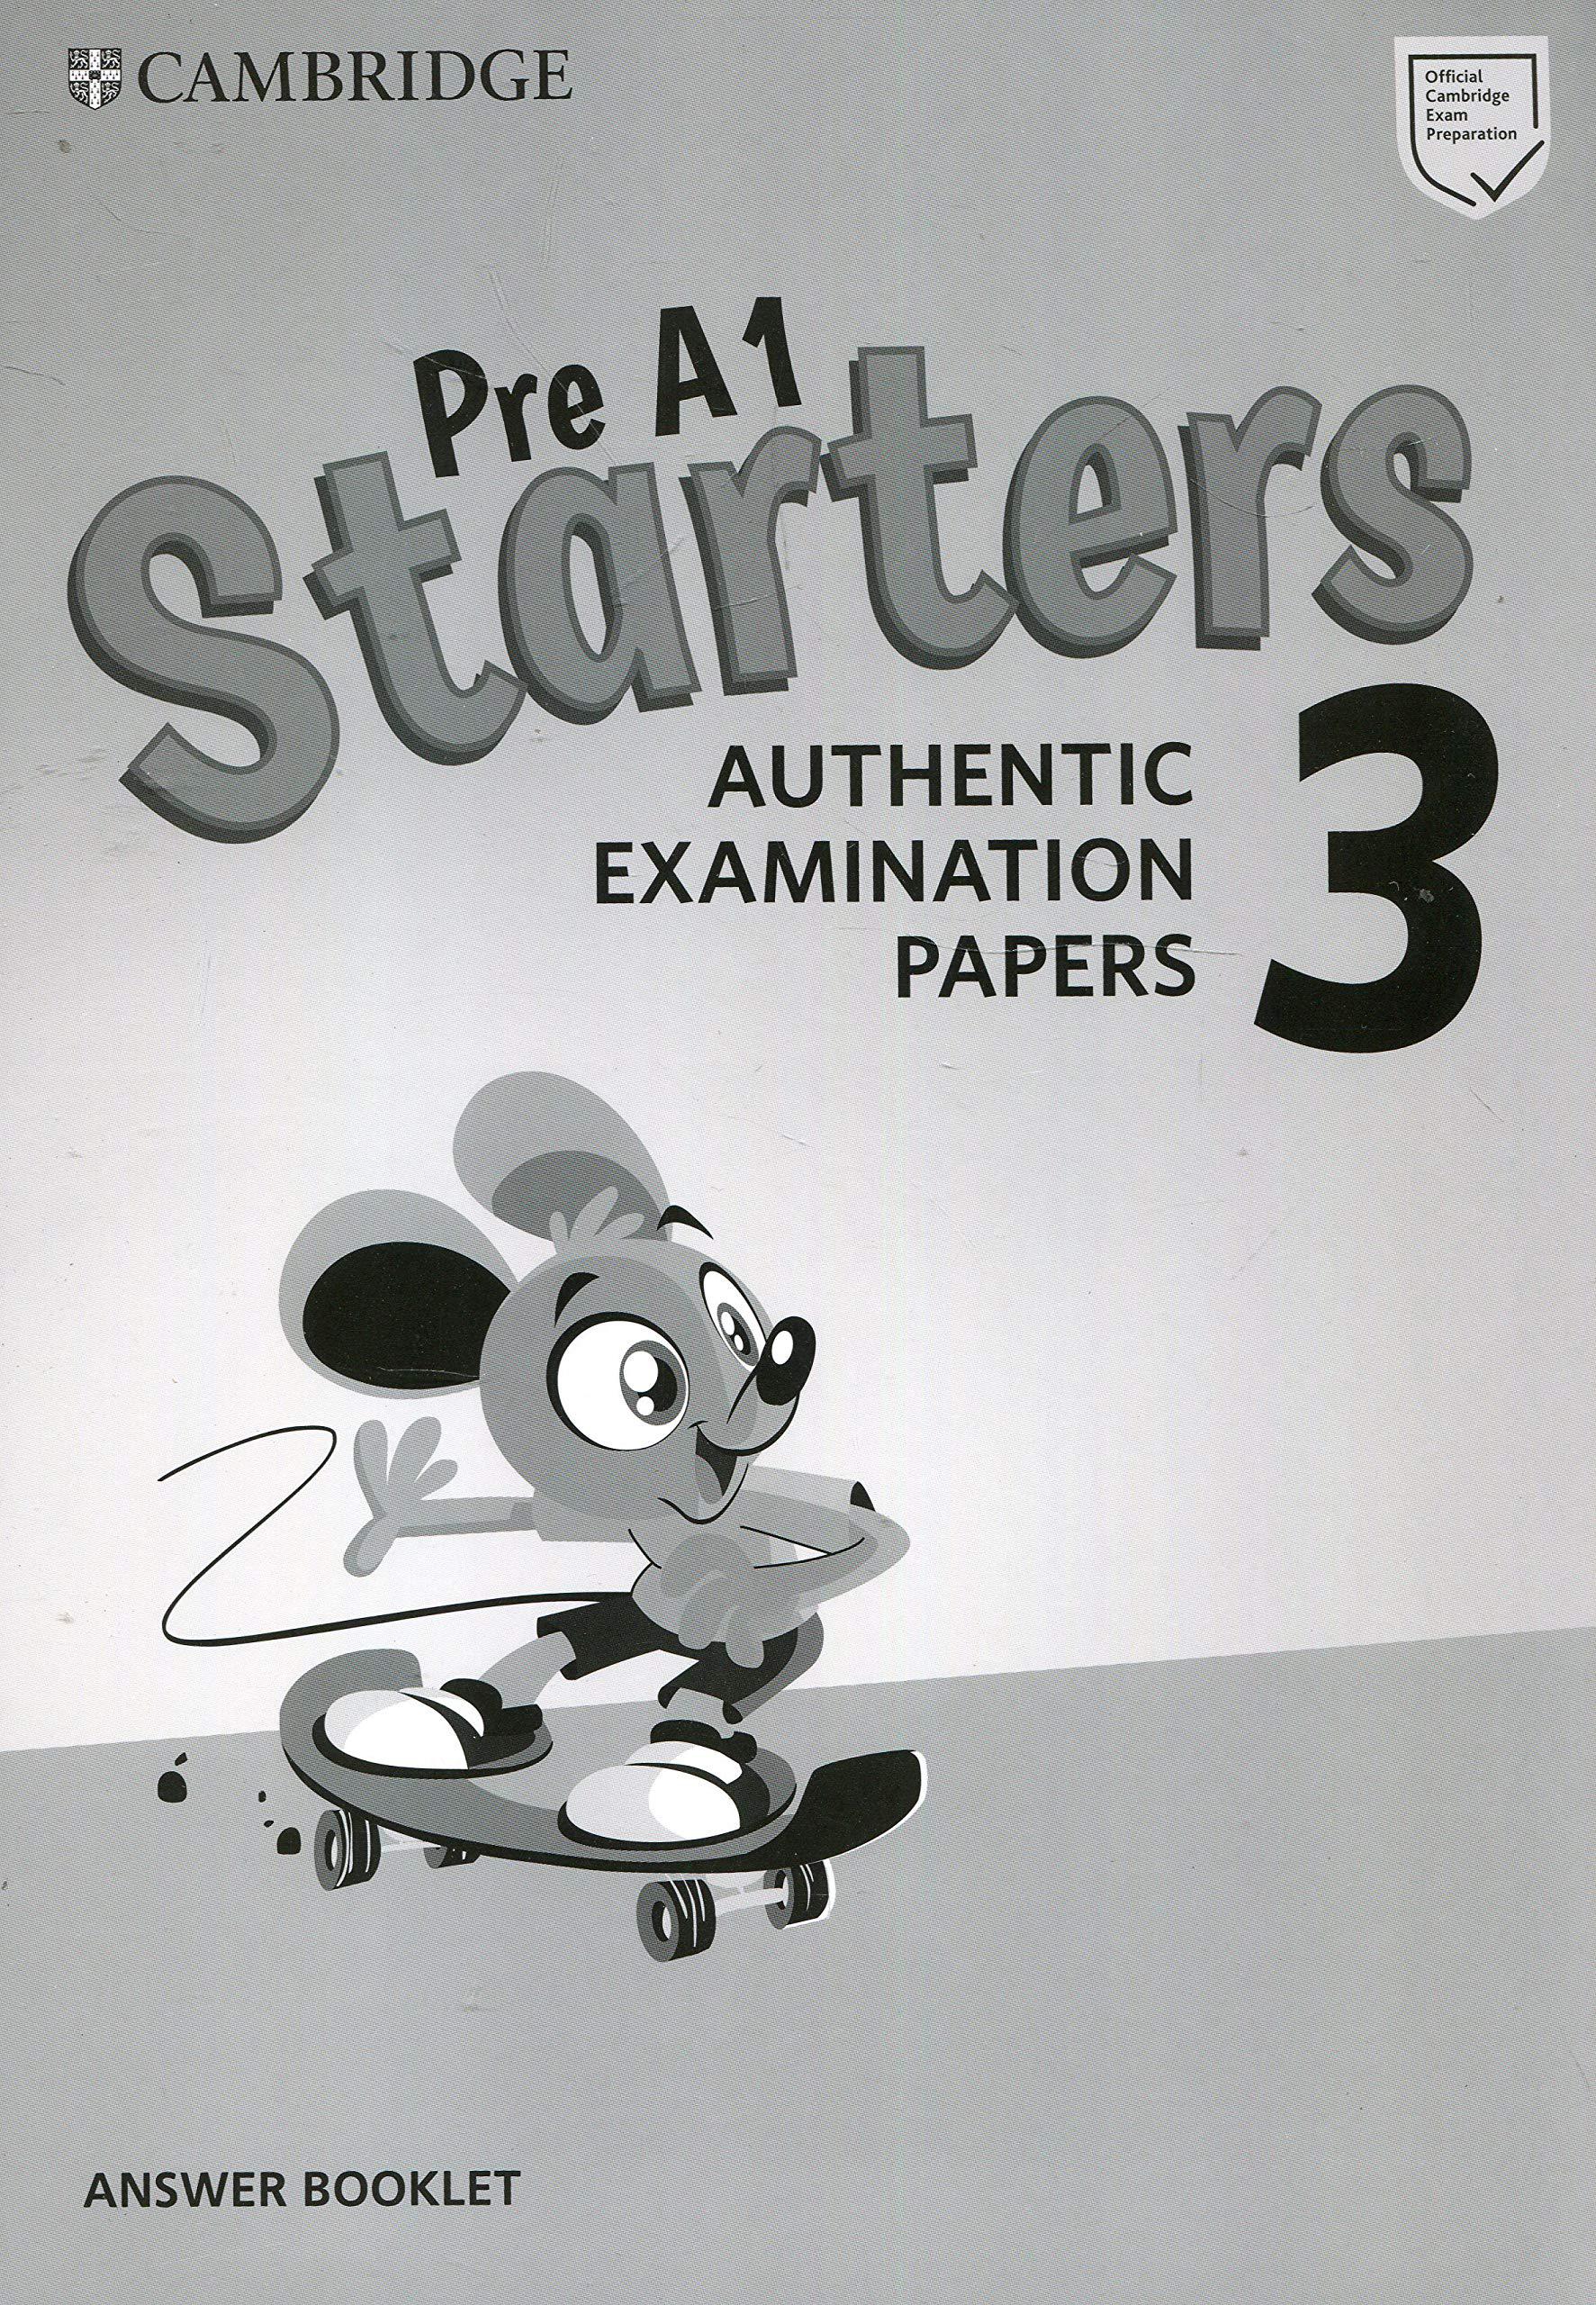 Pre a1 starters. Starters 3 authentic examination papers. Flyers authentic examination papers 1. Starters authentic examination papers 1 Audio.